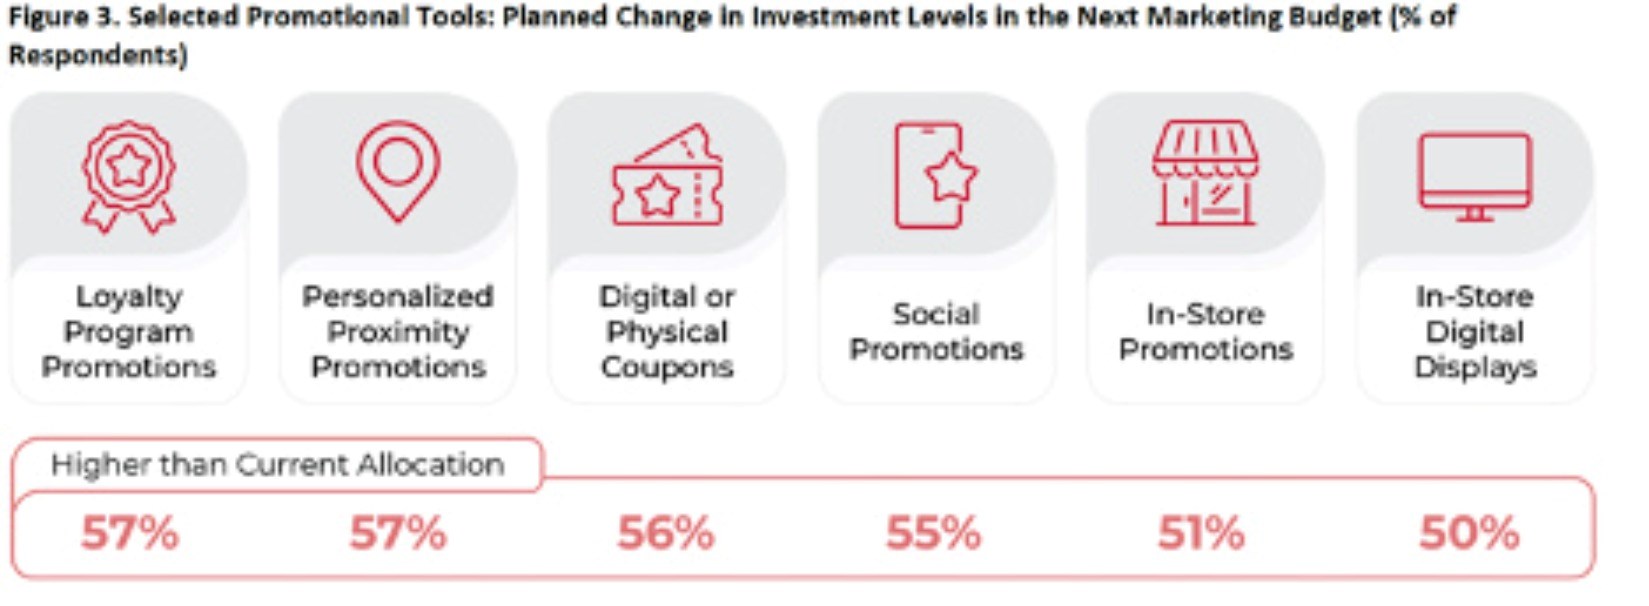 Planned change in investment levels in the next marketing budget